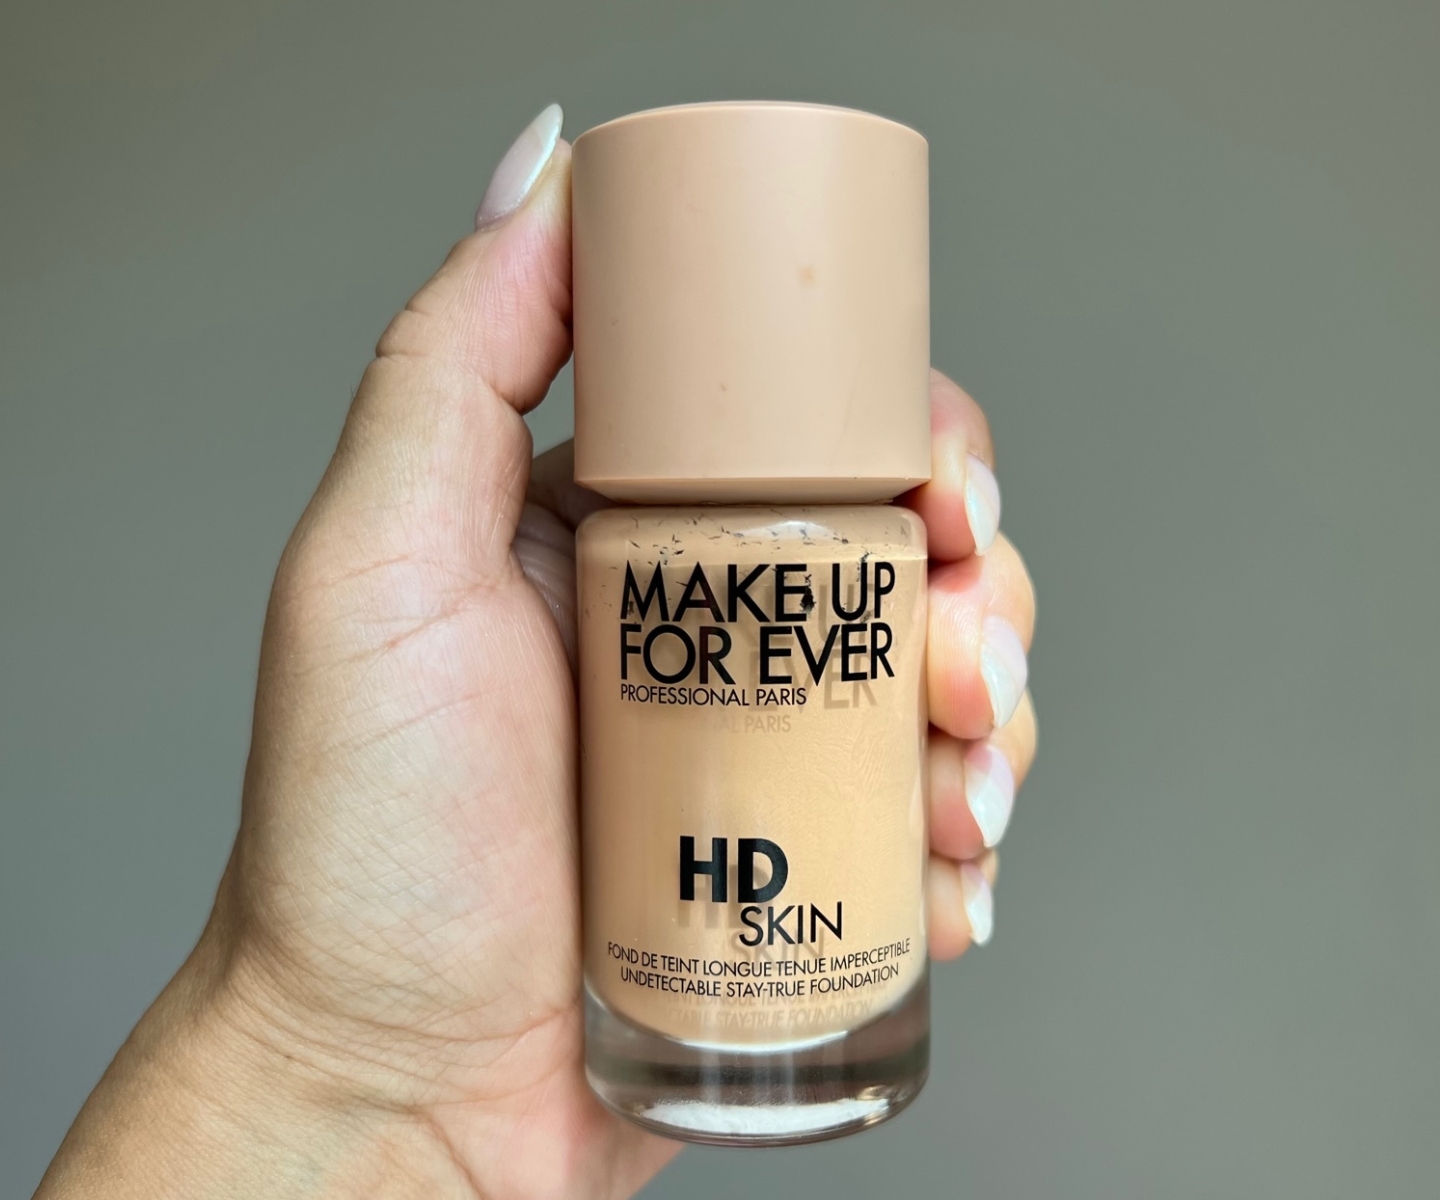 Make up for ever HD foundation hero